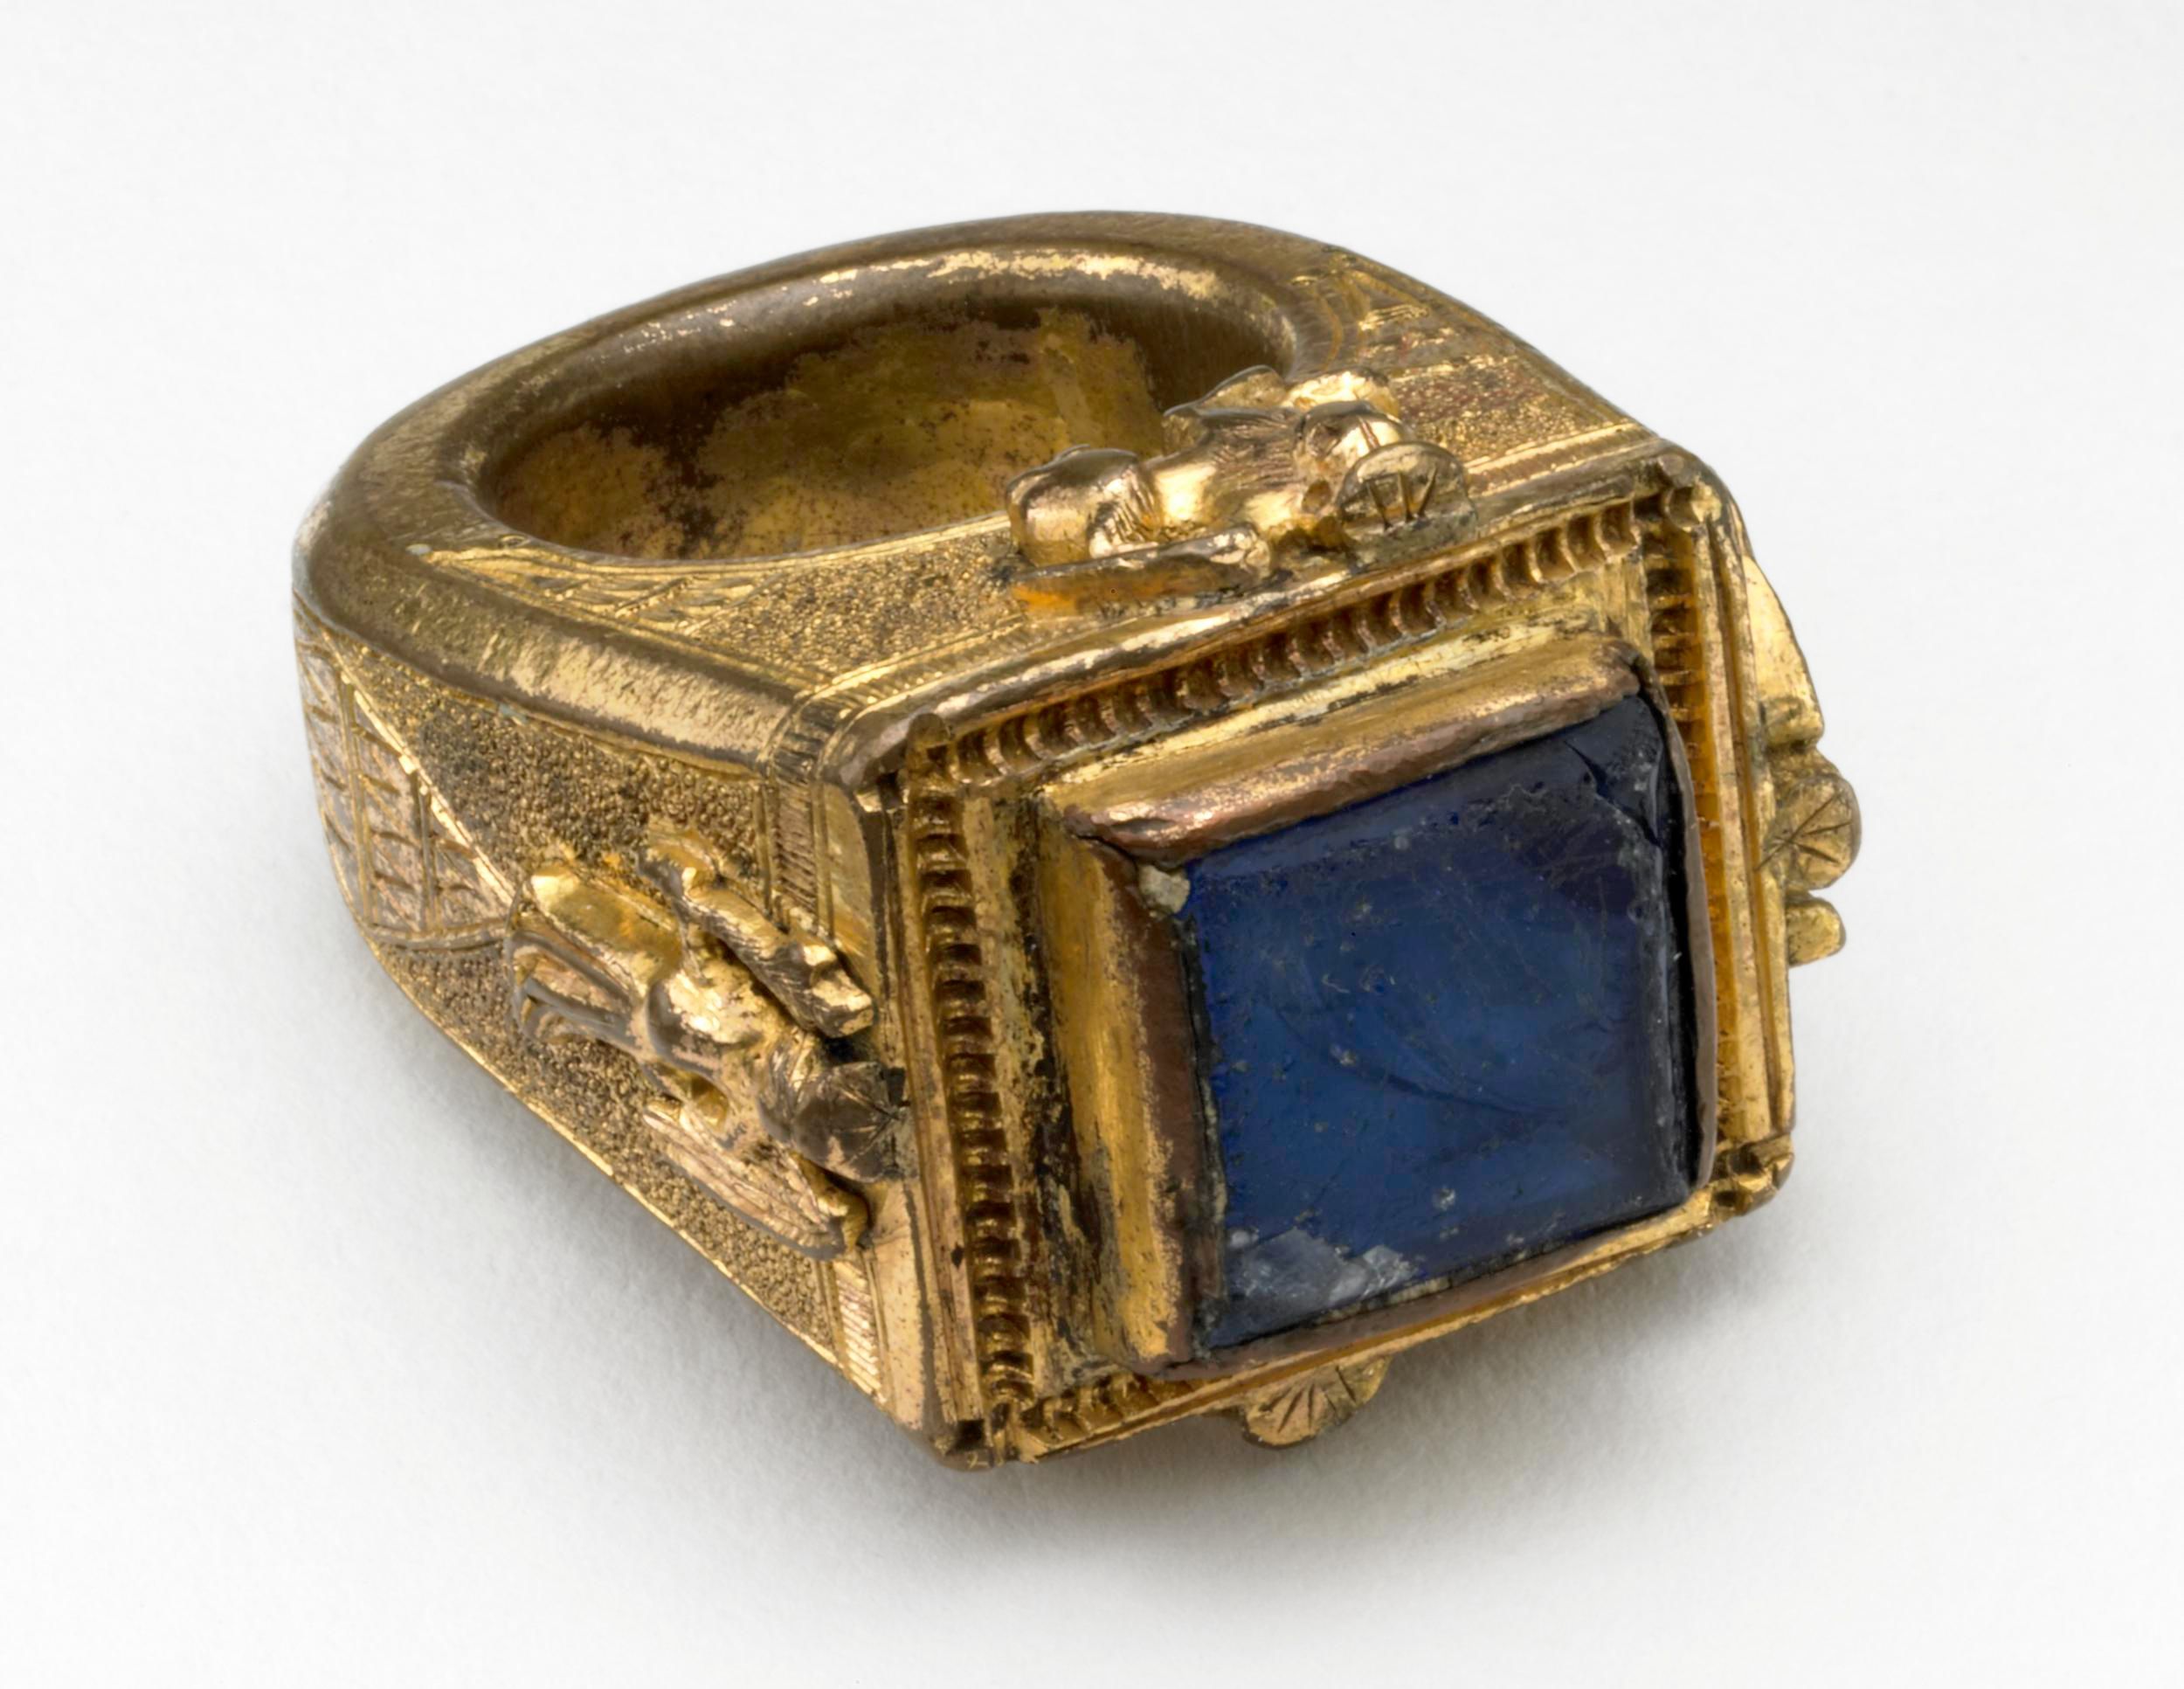 Surviving medieval glass jewelry is extremely rare. It wasn’t until the Renaissance that the technology for sealing the glass gemstones advanced to protect the gem. Papal ring, 15th century. The British Museum. 